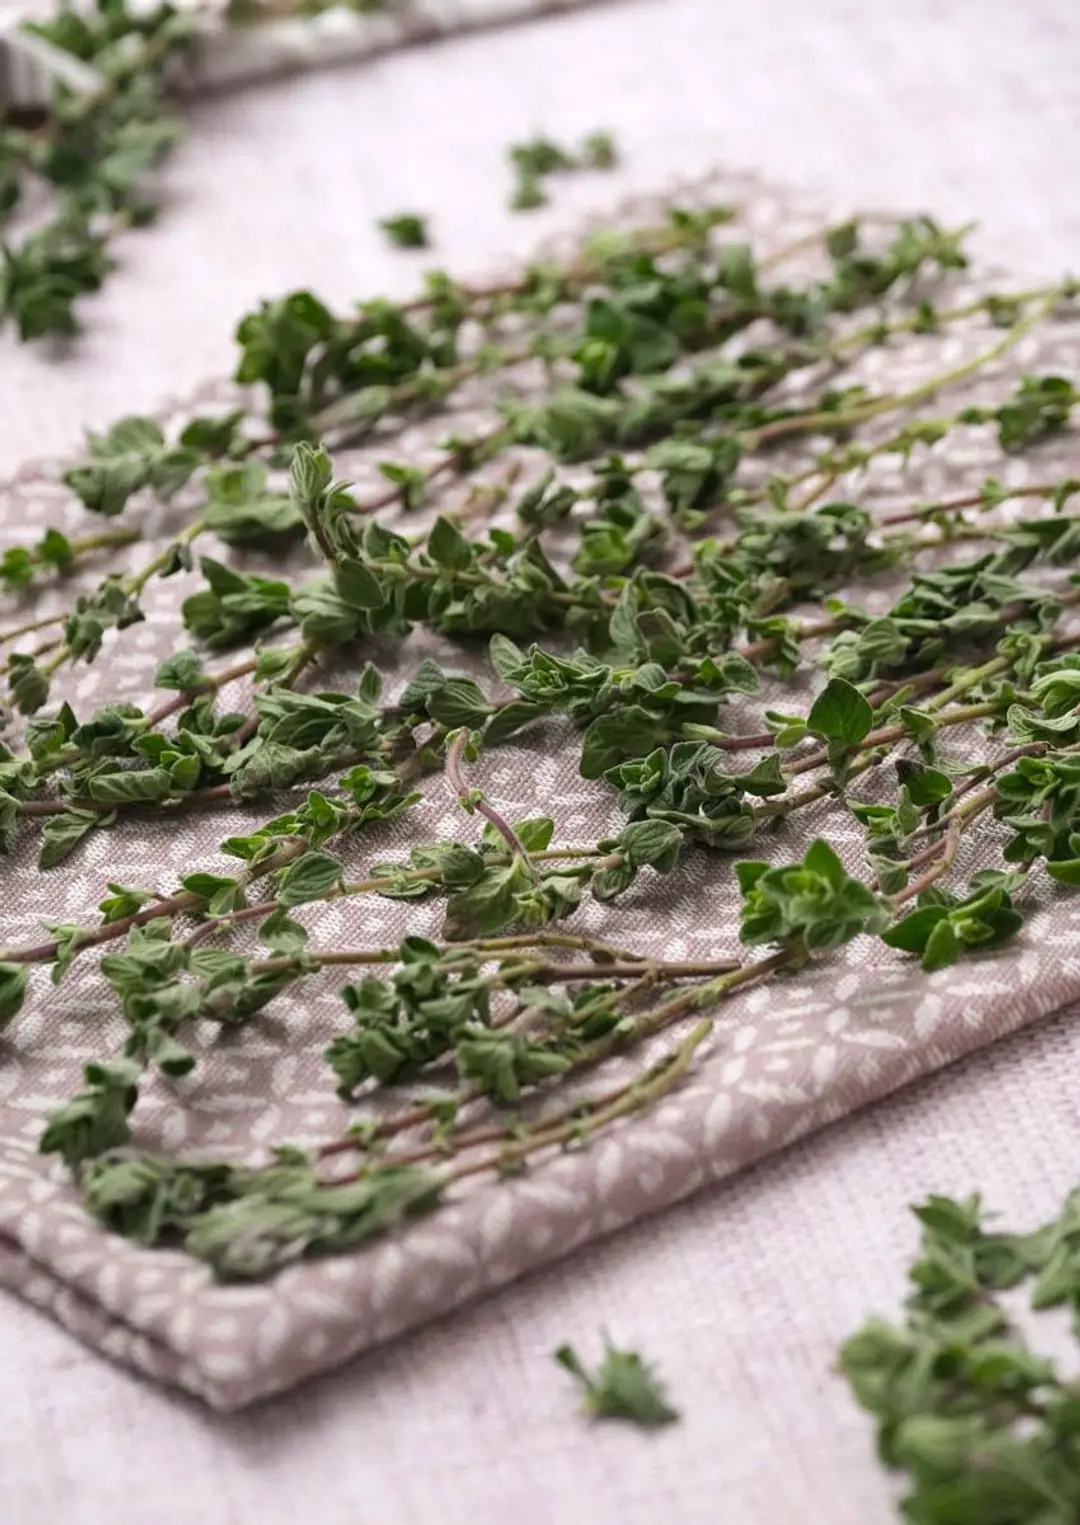 How to Dry Oregano Leaves in the Oven